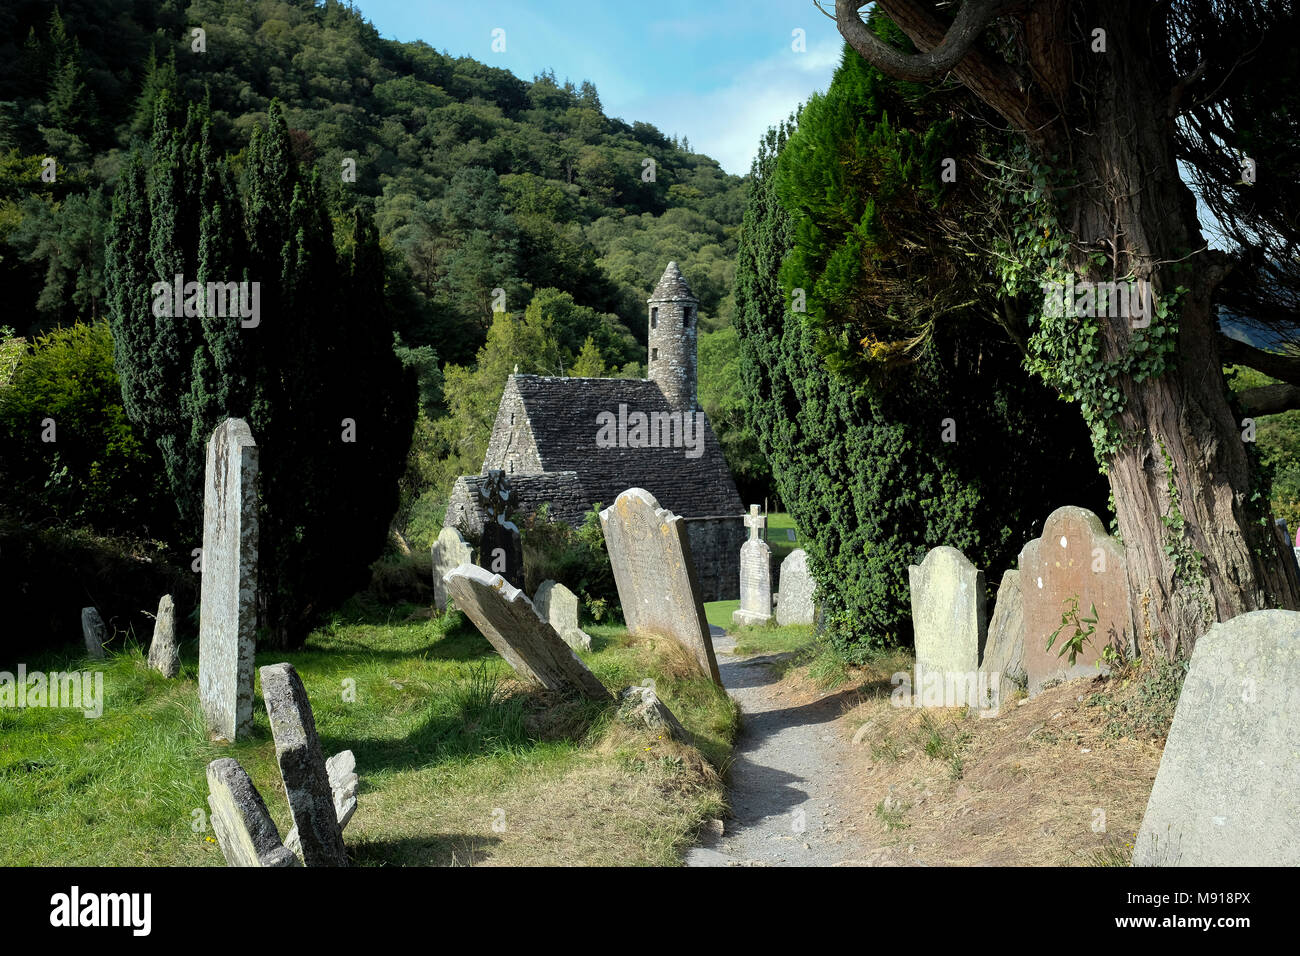 Ireland. Glendalough is home to one of the most important monastic sites in Ireland.  St. Kevinâ€™s Church better known as St. Kevinâ€™s Kitchen is a Stock Photo